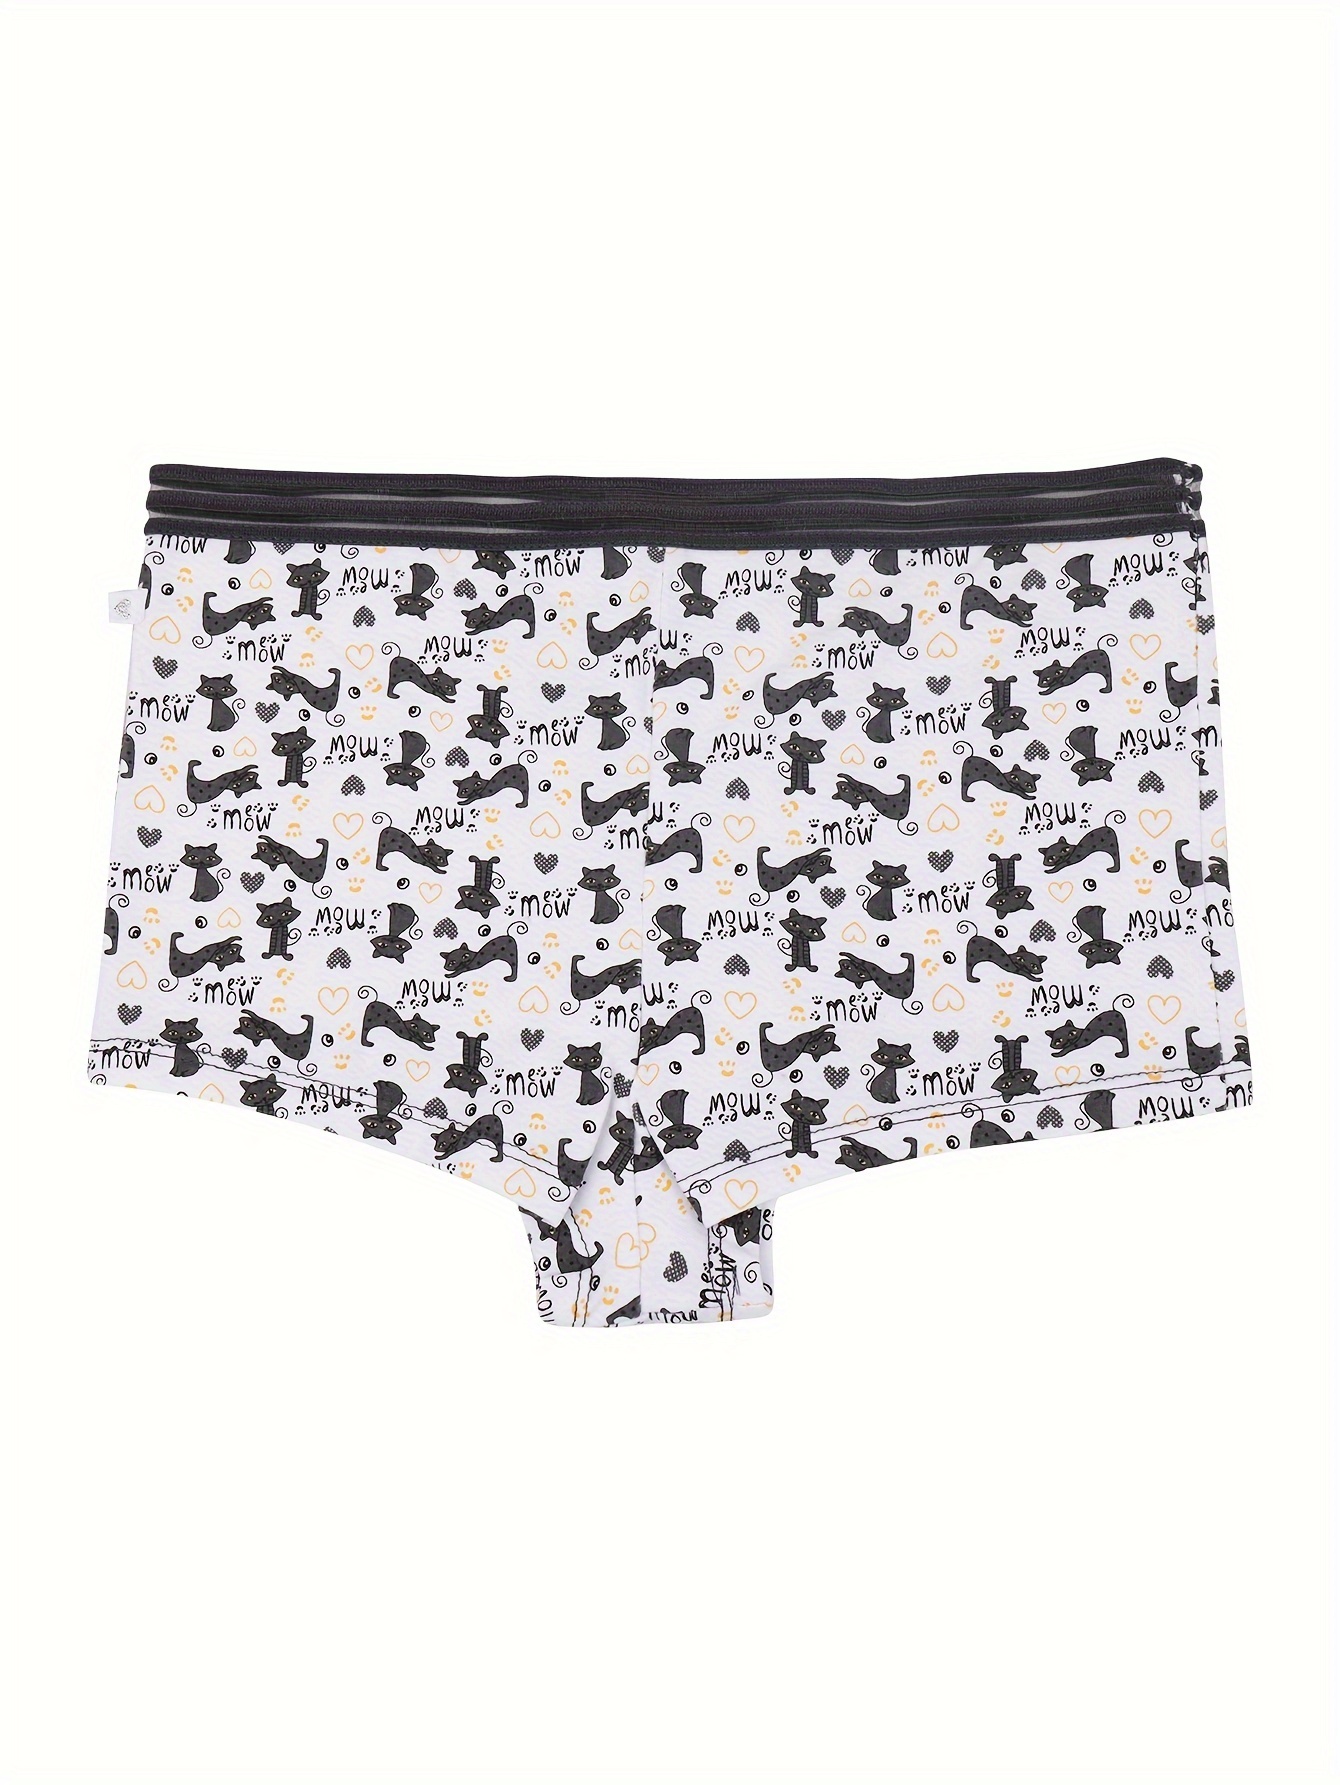  WorldGES Cheetah Print Girls' Panties Soft Cotton Underwear  Cool Breathable Comfort Panty Briefs Stretch Mid Rise Undies for Kids Teens:  Clothing, Shoes & Jewelry